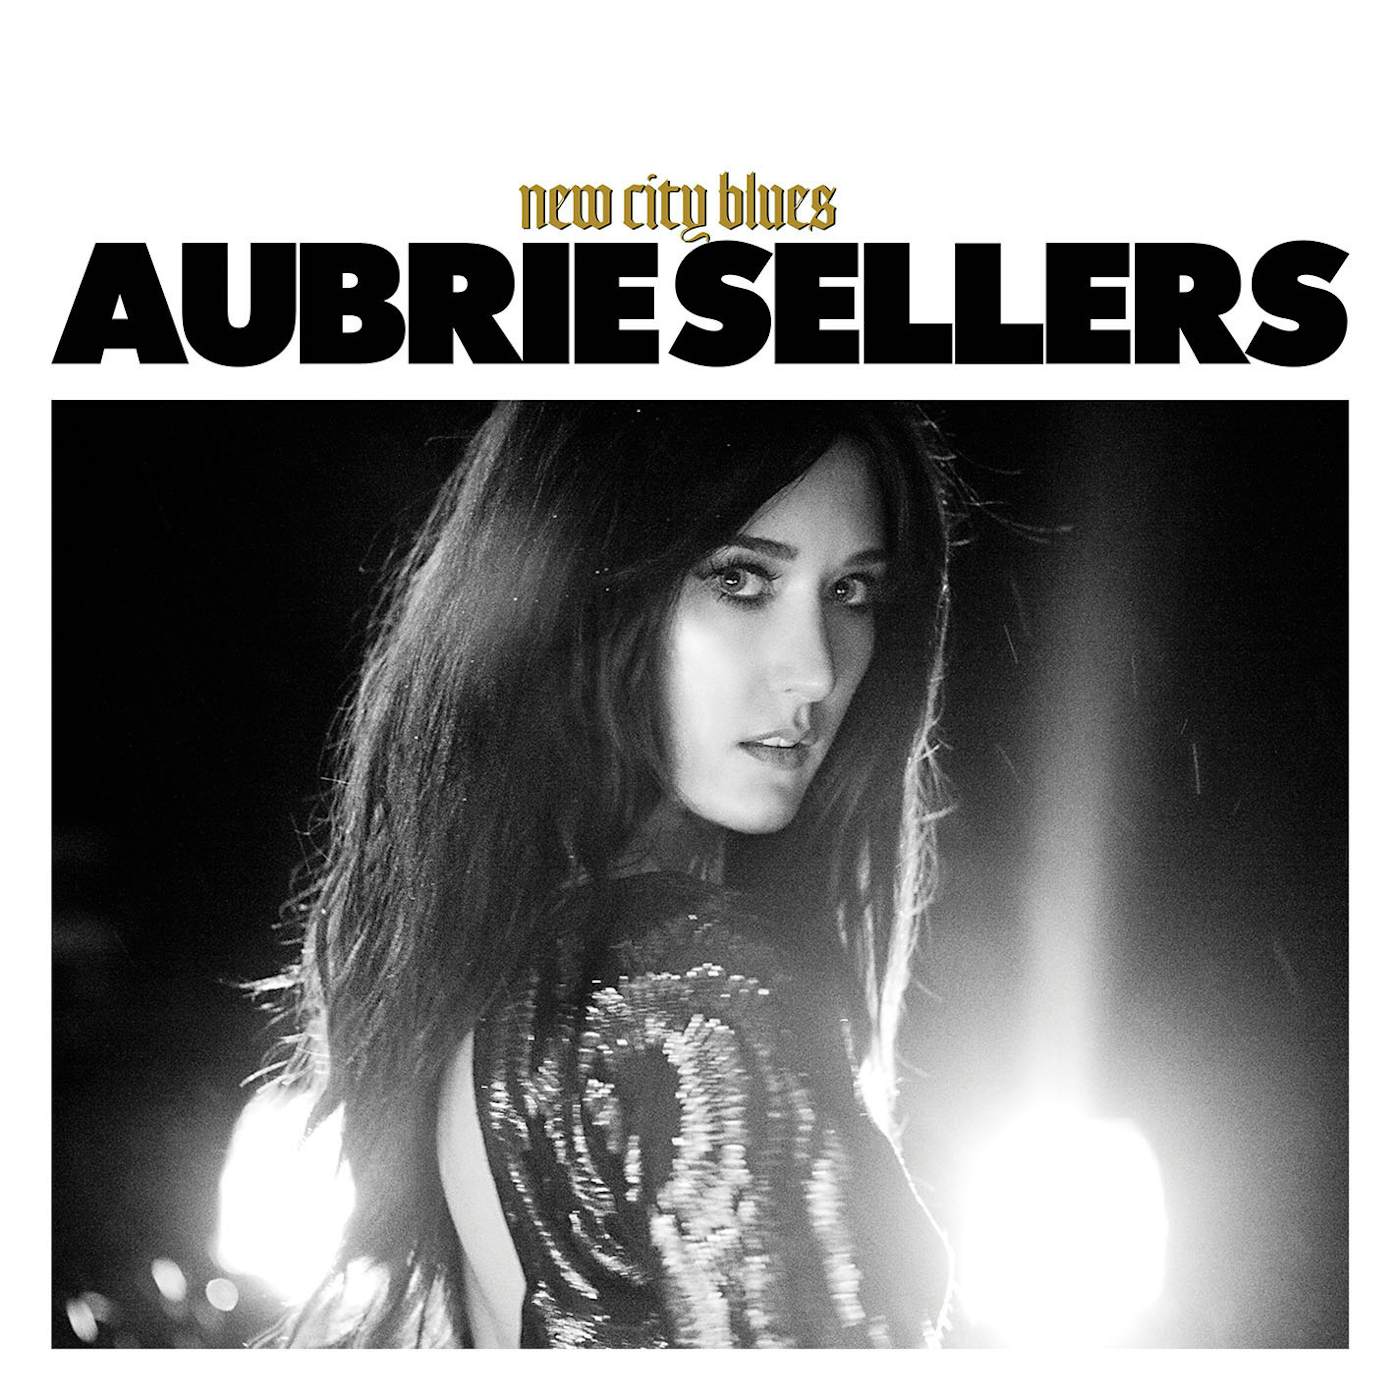 Aubrie Sellers New City Blues Vinyl Record